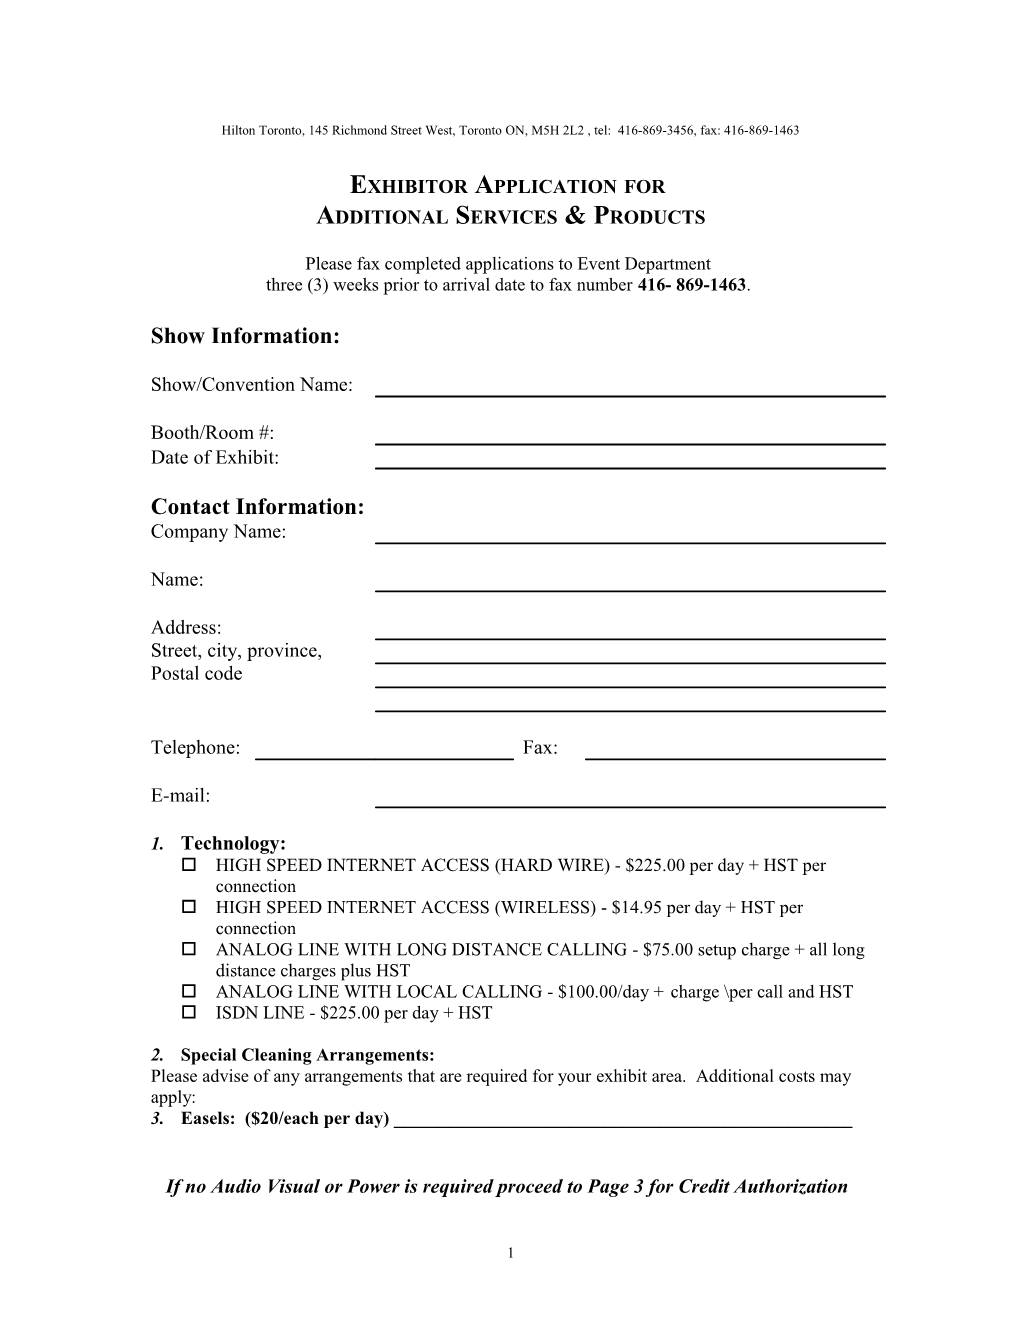 Exhibitor Application for Internet and Telephone Capabilites